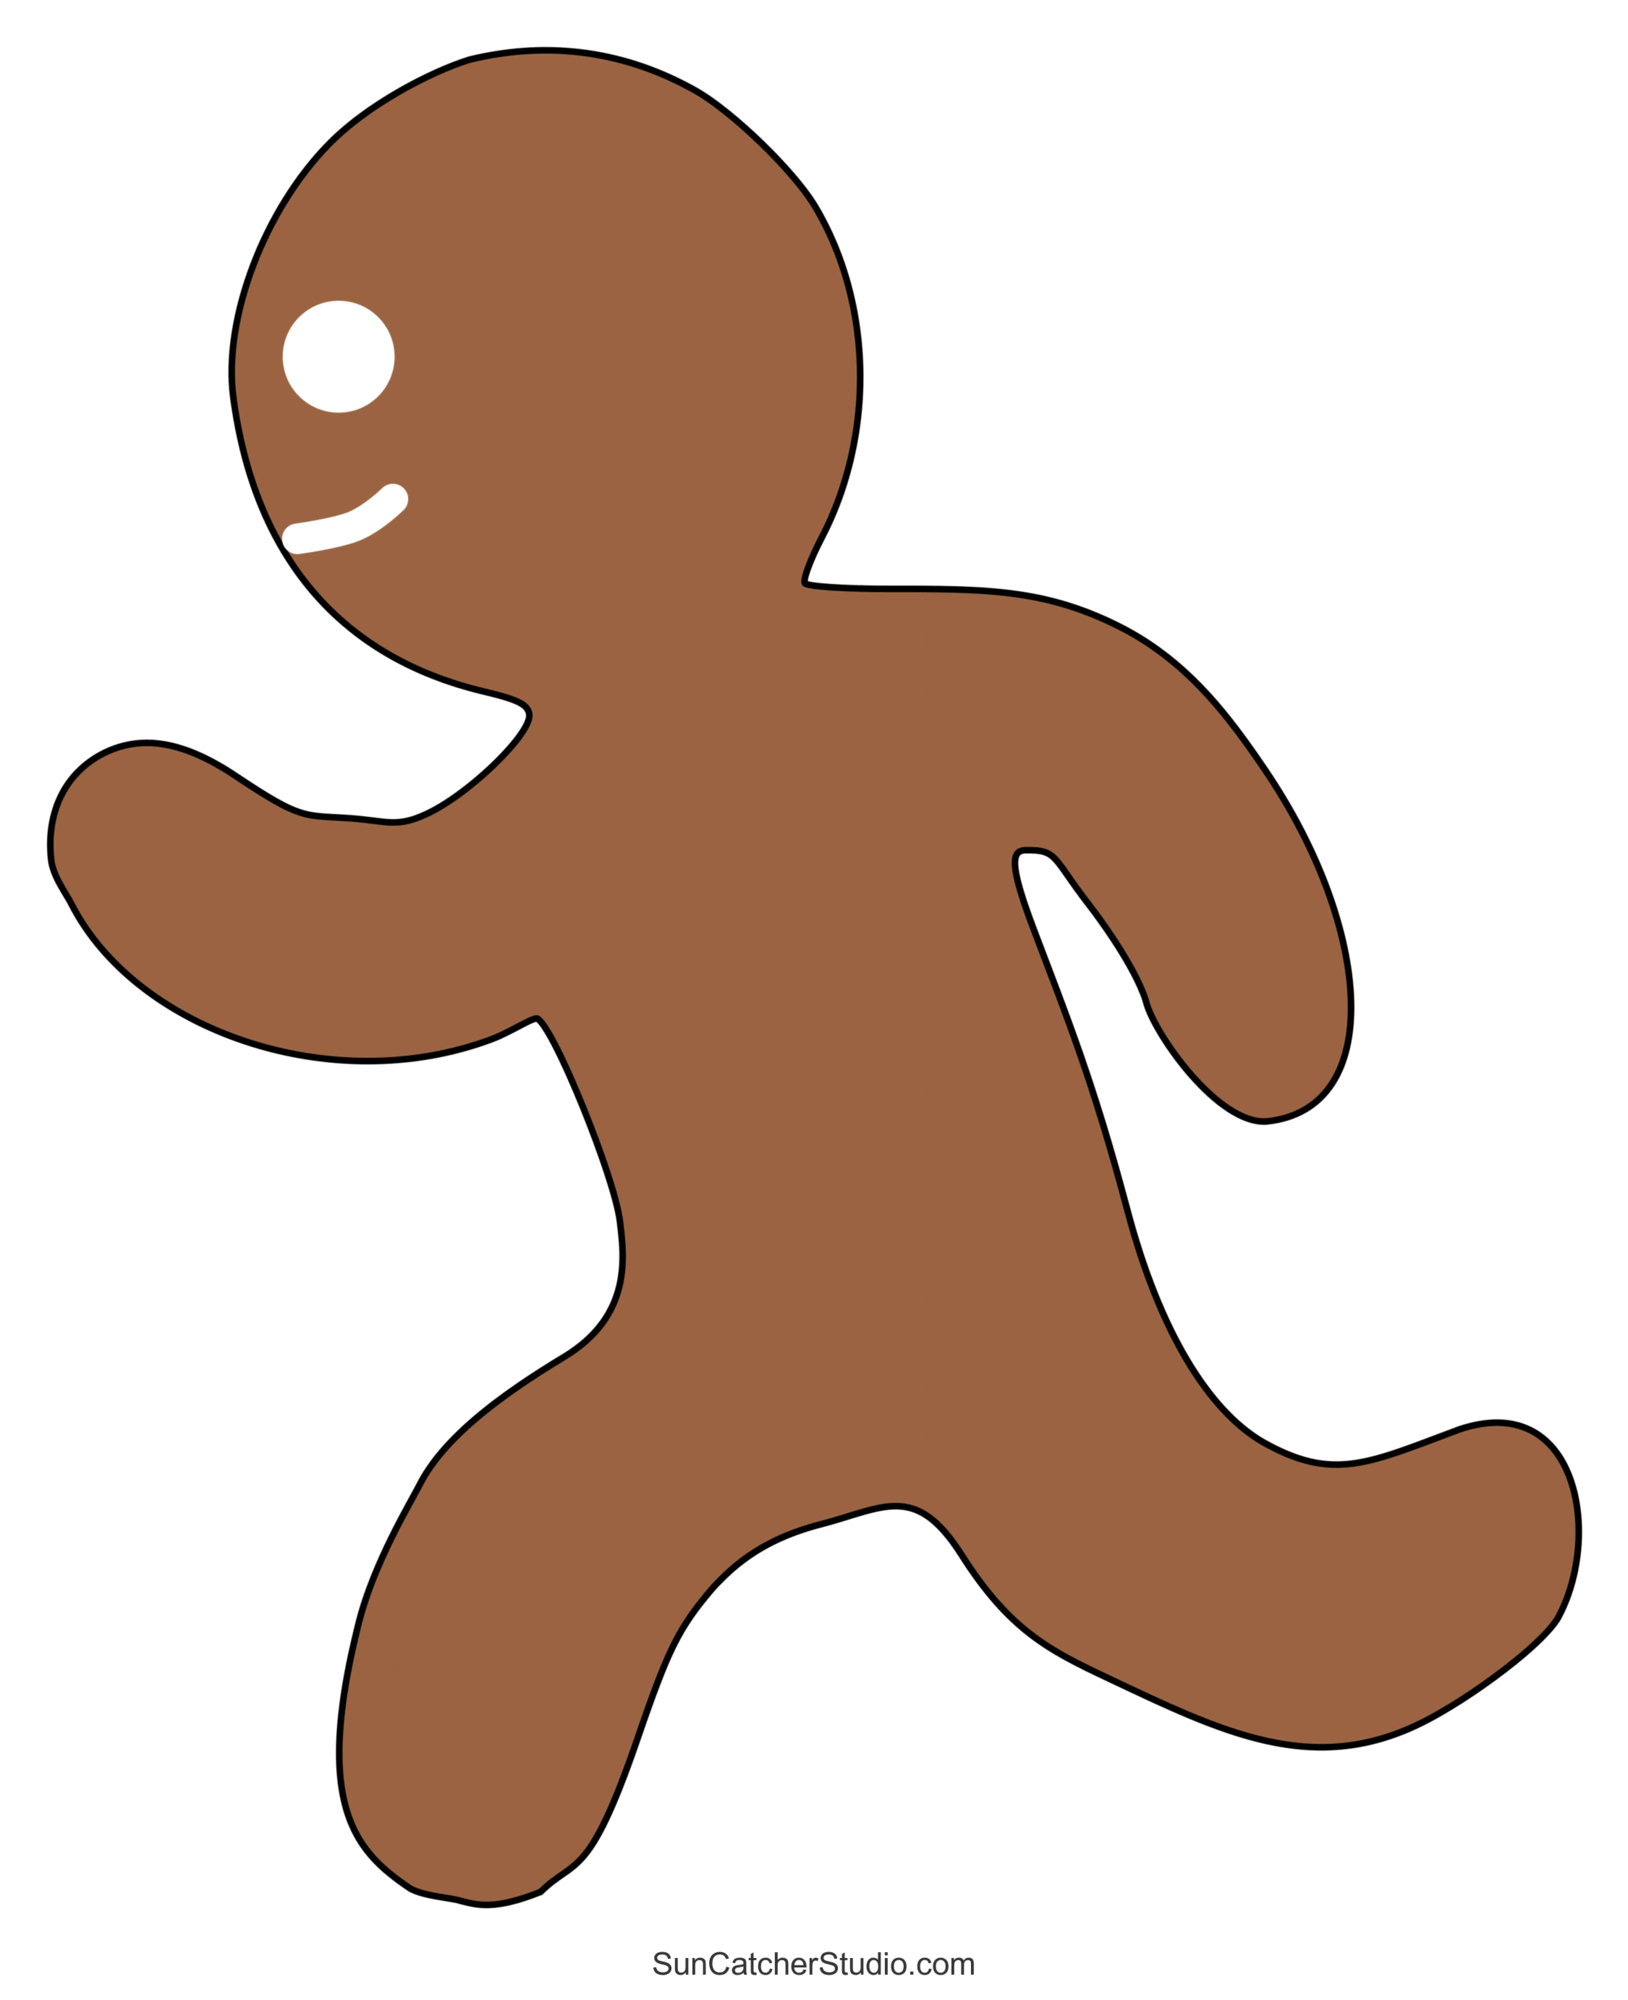 Gingerbread man templates printable outlines and patterns â diy projects patterns monograms designs templates